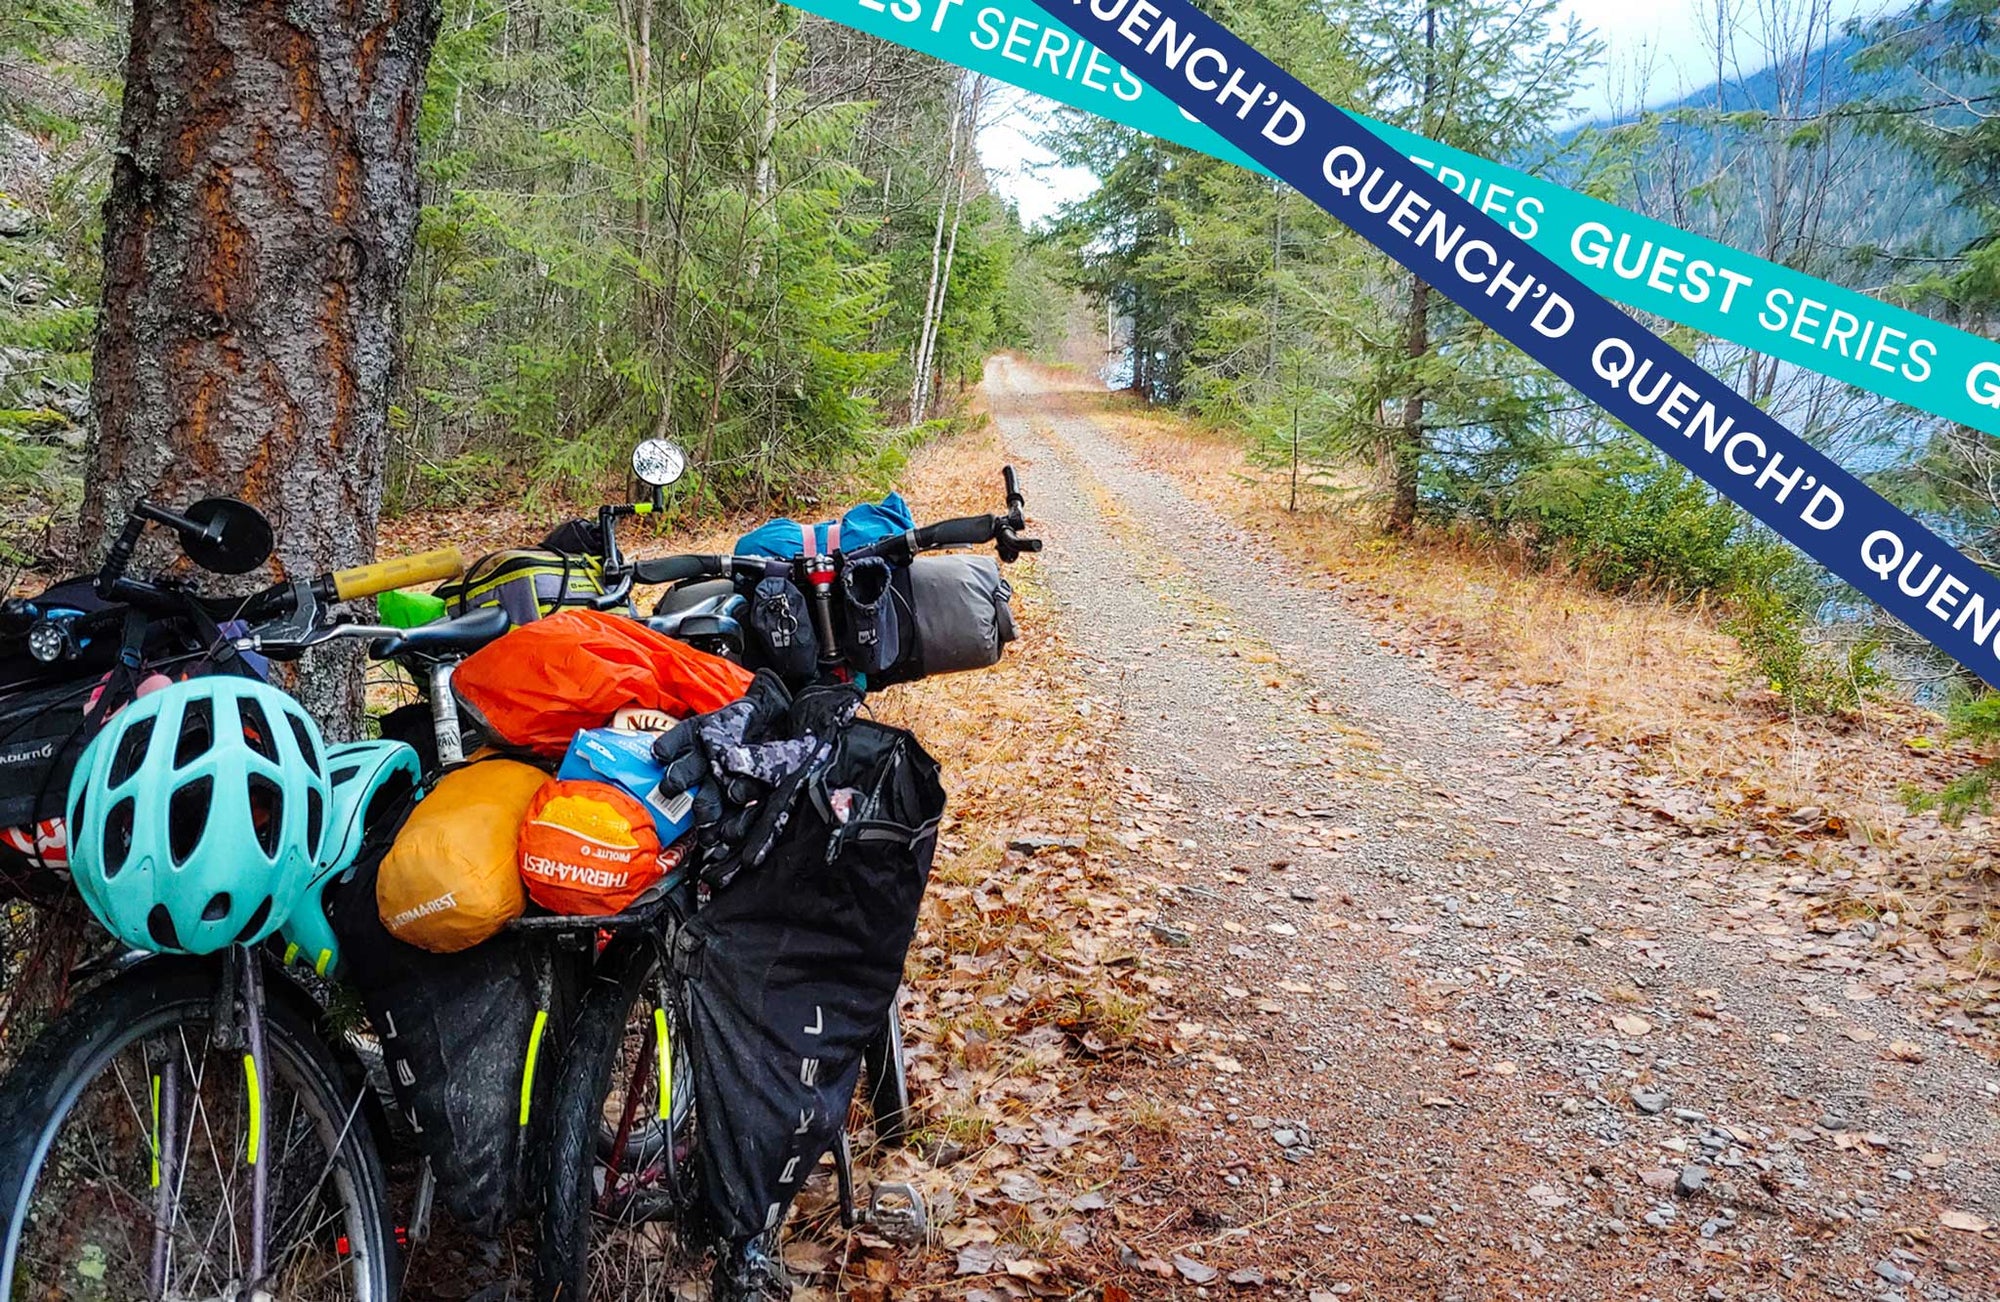 Quench'd: On Bikepacking